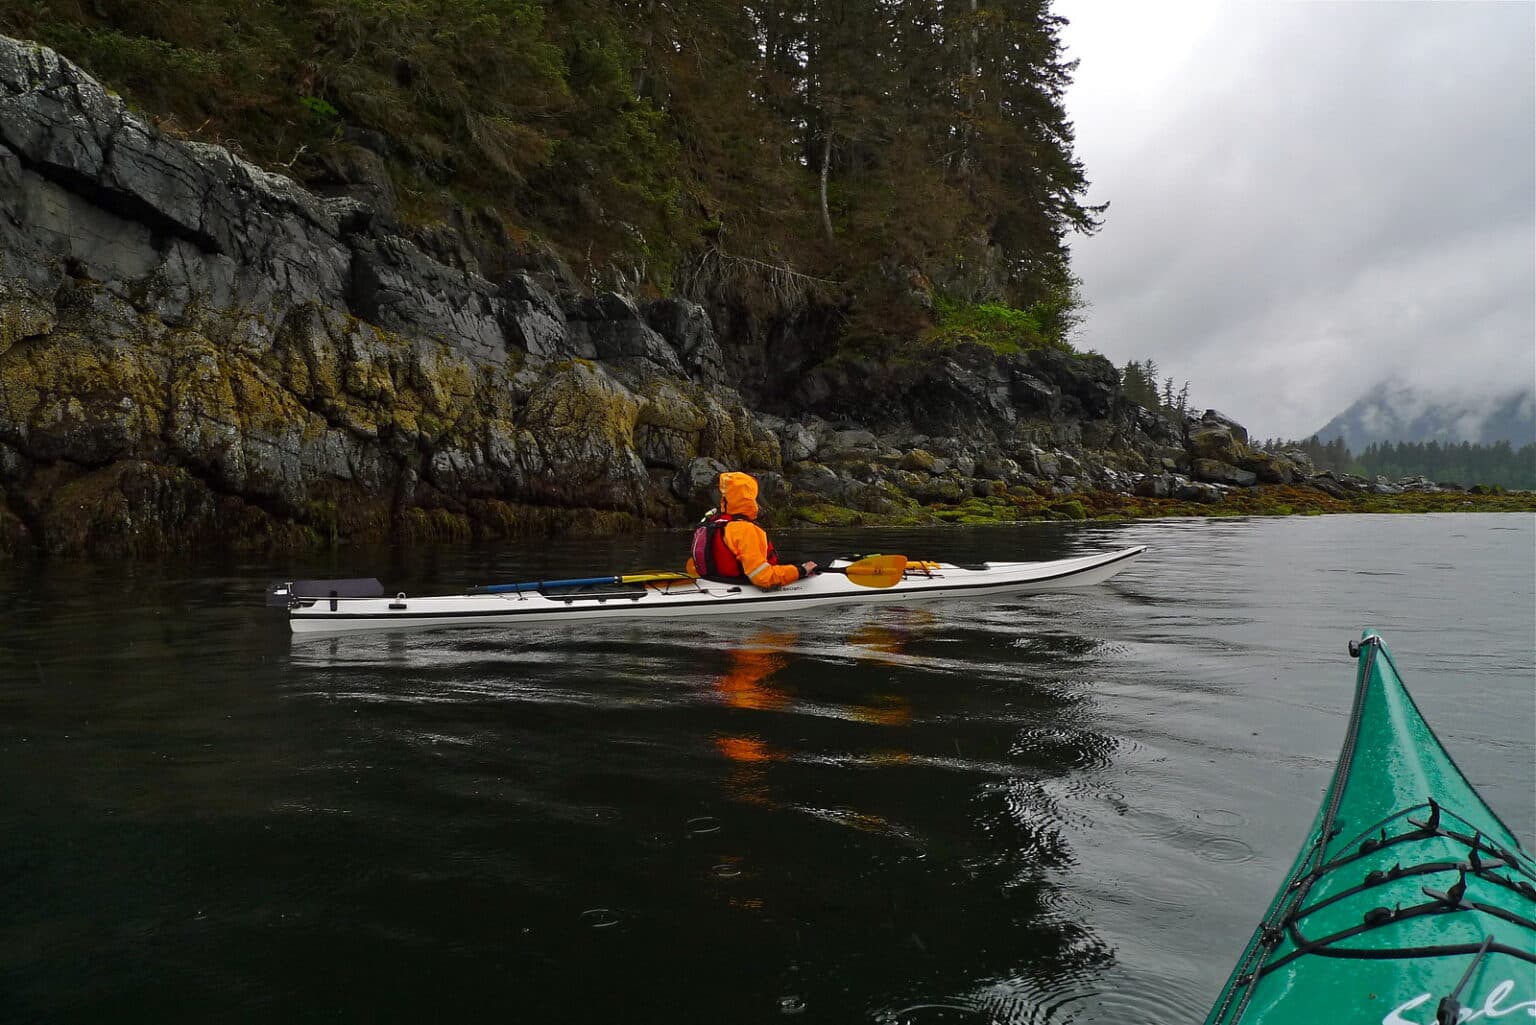 Kayaker in vibrant orange gear paddling near a rocky shoreline with misty mountains in the background